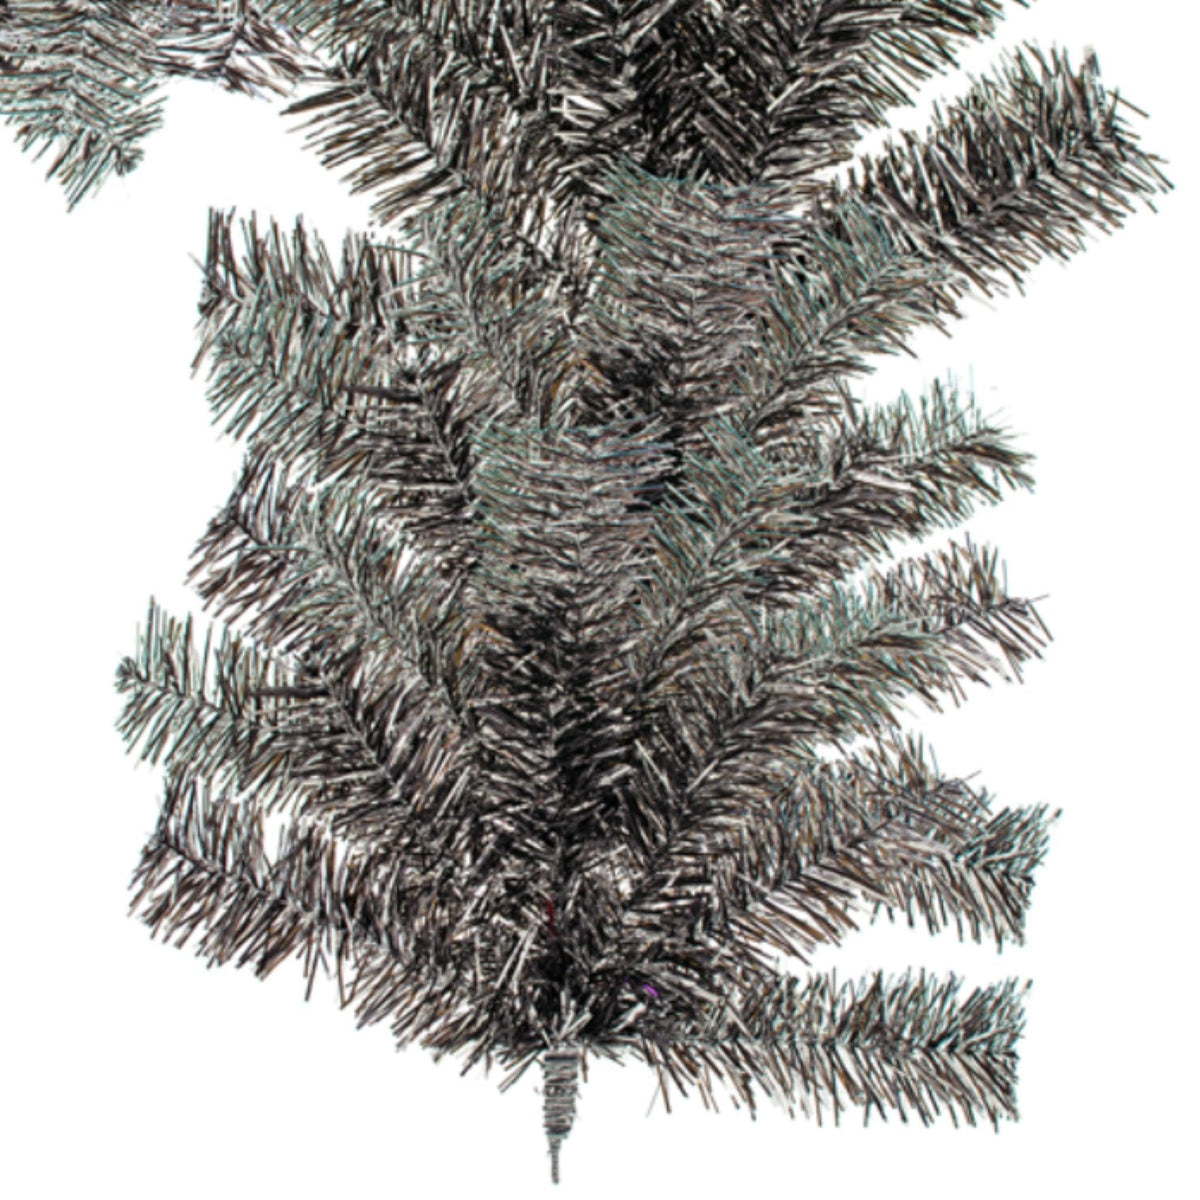 Bottom 6ft Black and Silver Christmas Brush Garland is made in the USA.  Available for sale at leedisplay.com